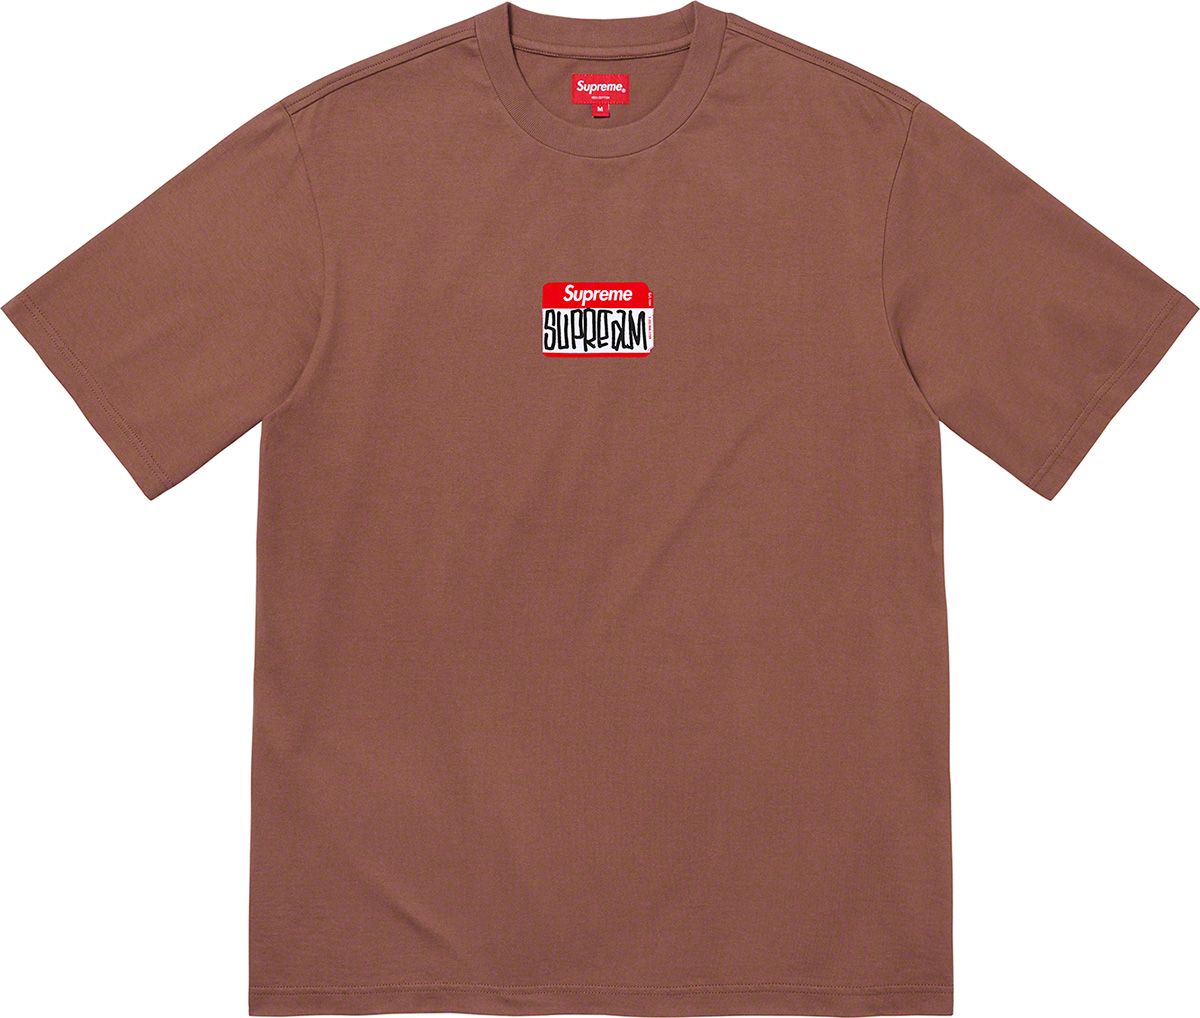 Gonz Nametag S/S Top – Supreme